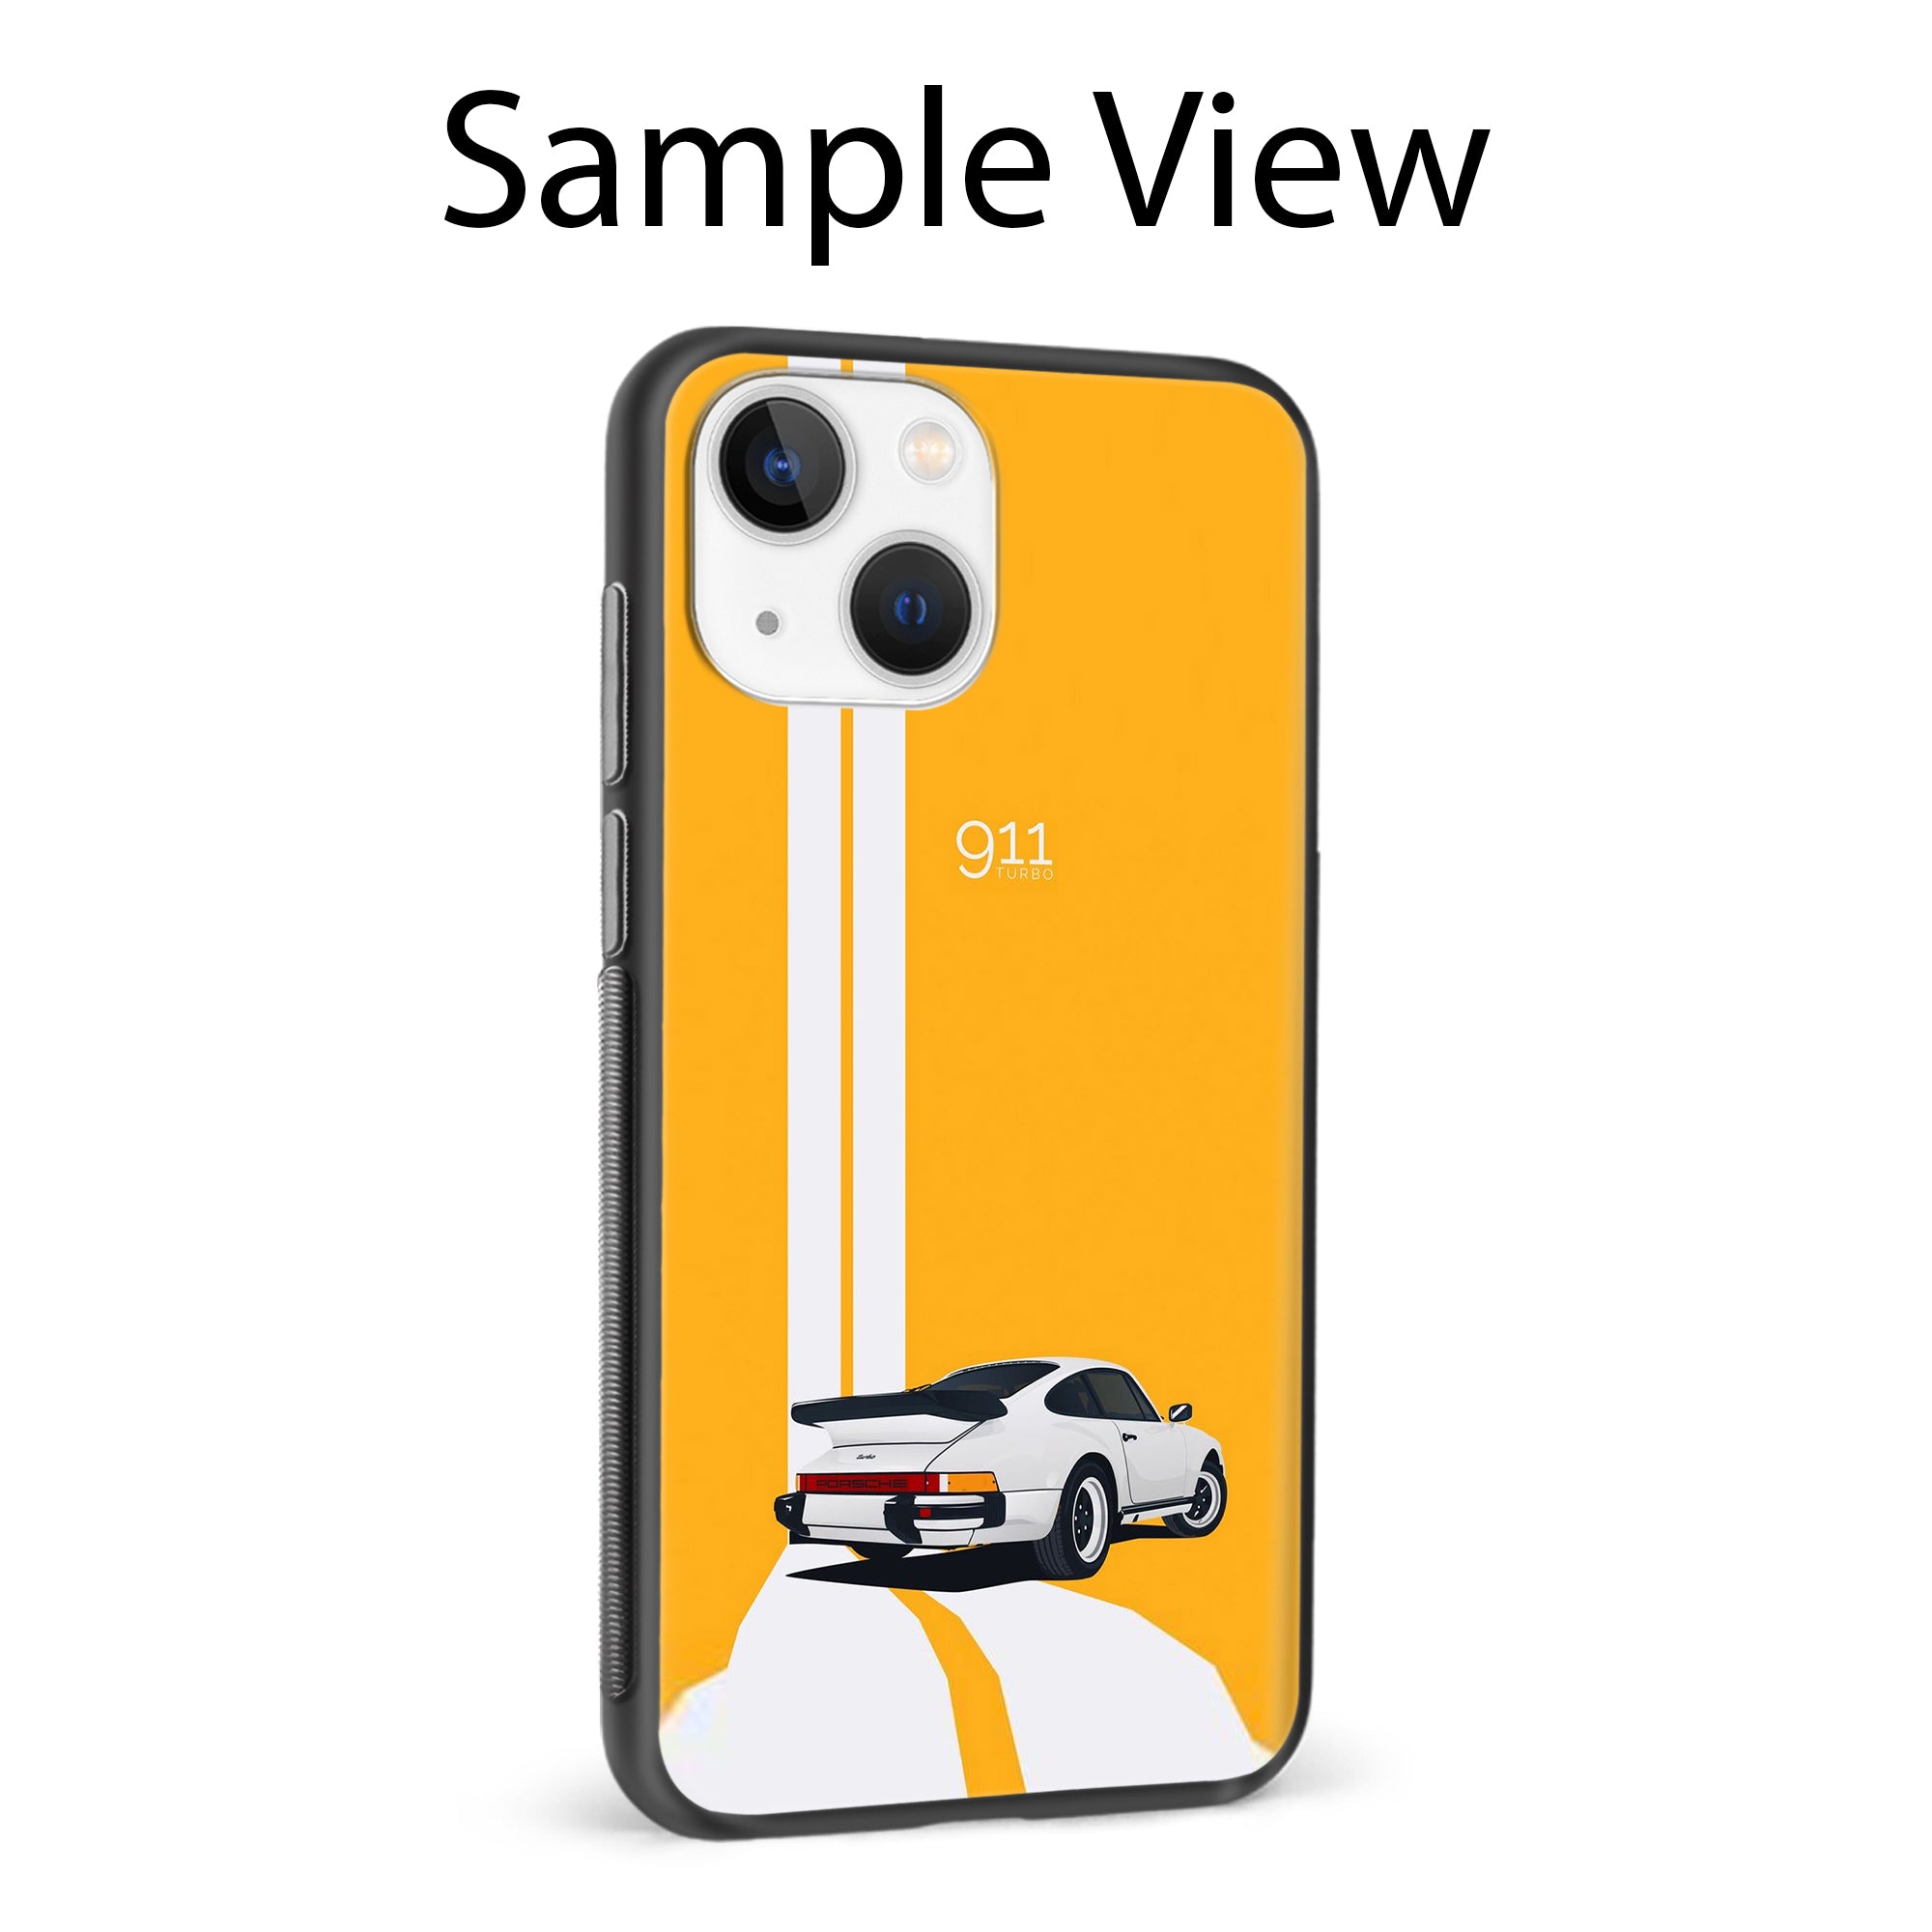 Buy 911 Gt Porche Glass/Metal Back Mobile Phone Case/Cover For iPhone 11 Pro Online